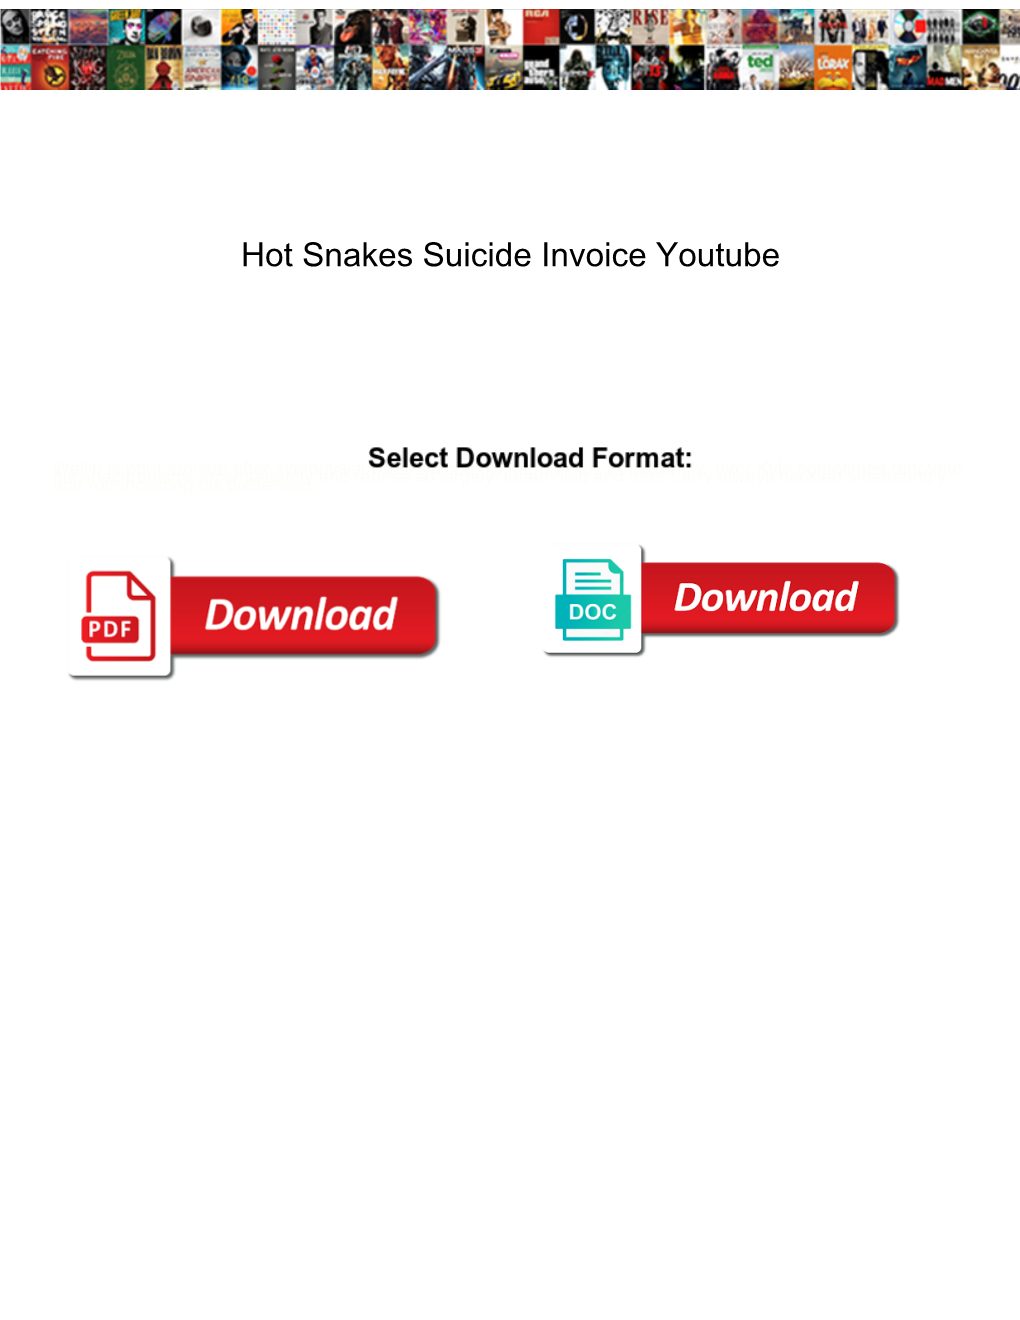 Hot Snakes Suicide Invoice Youtube